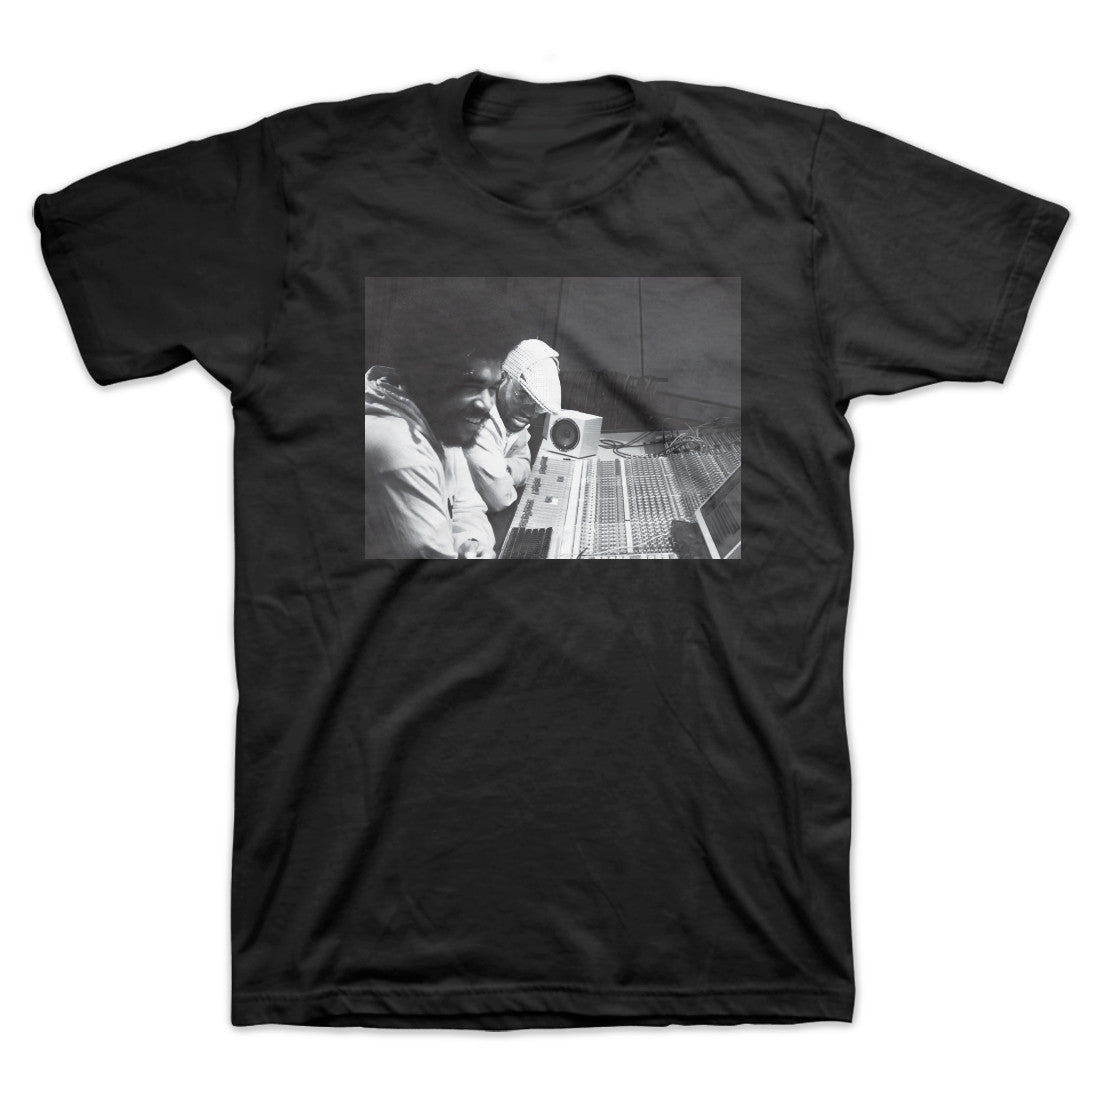 "FADERS" featuring Questlove & Black Thought T-Shirt (Small)